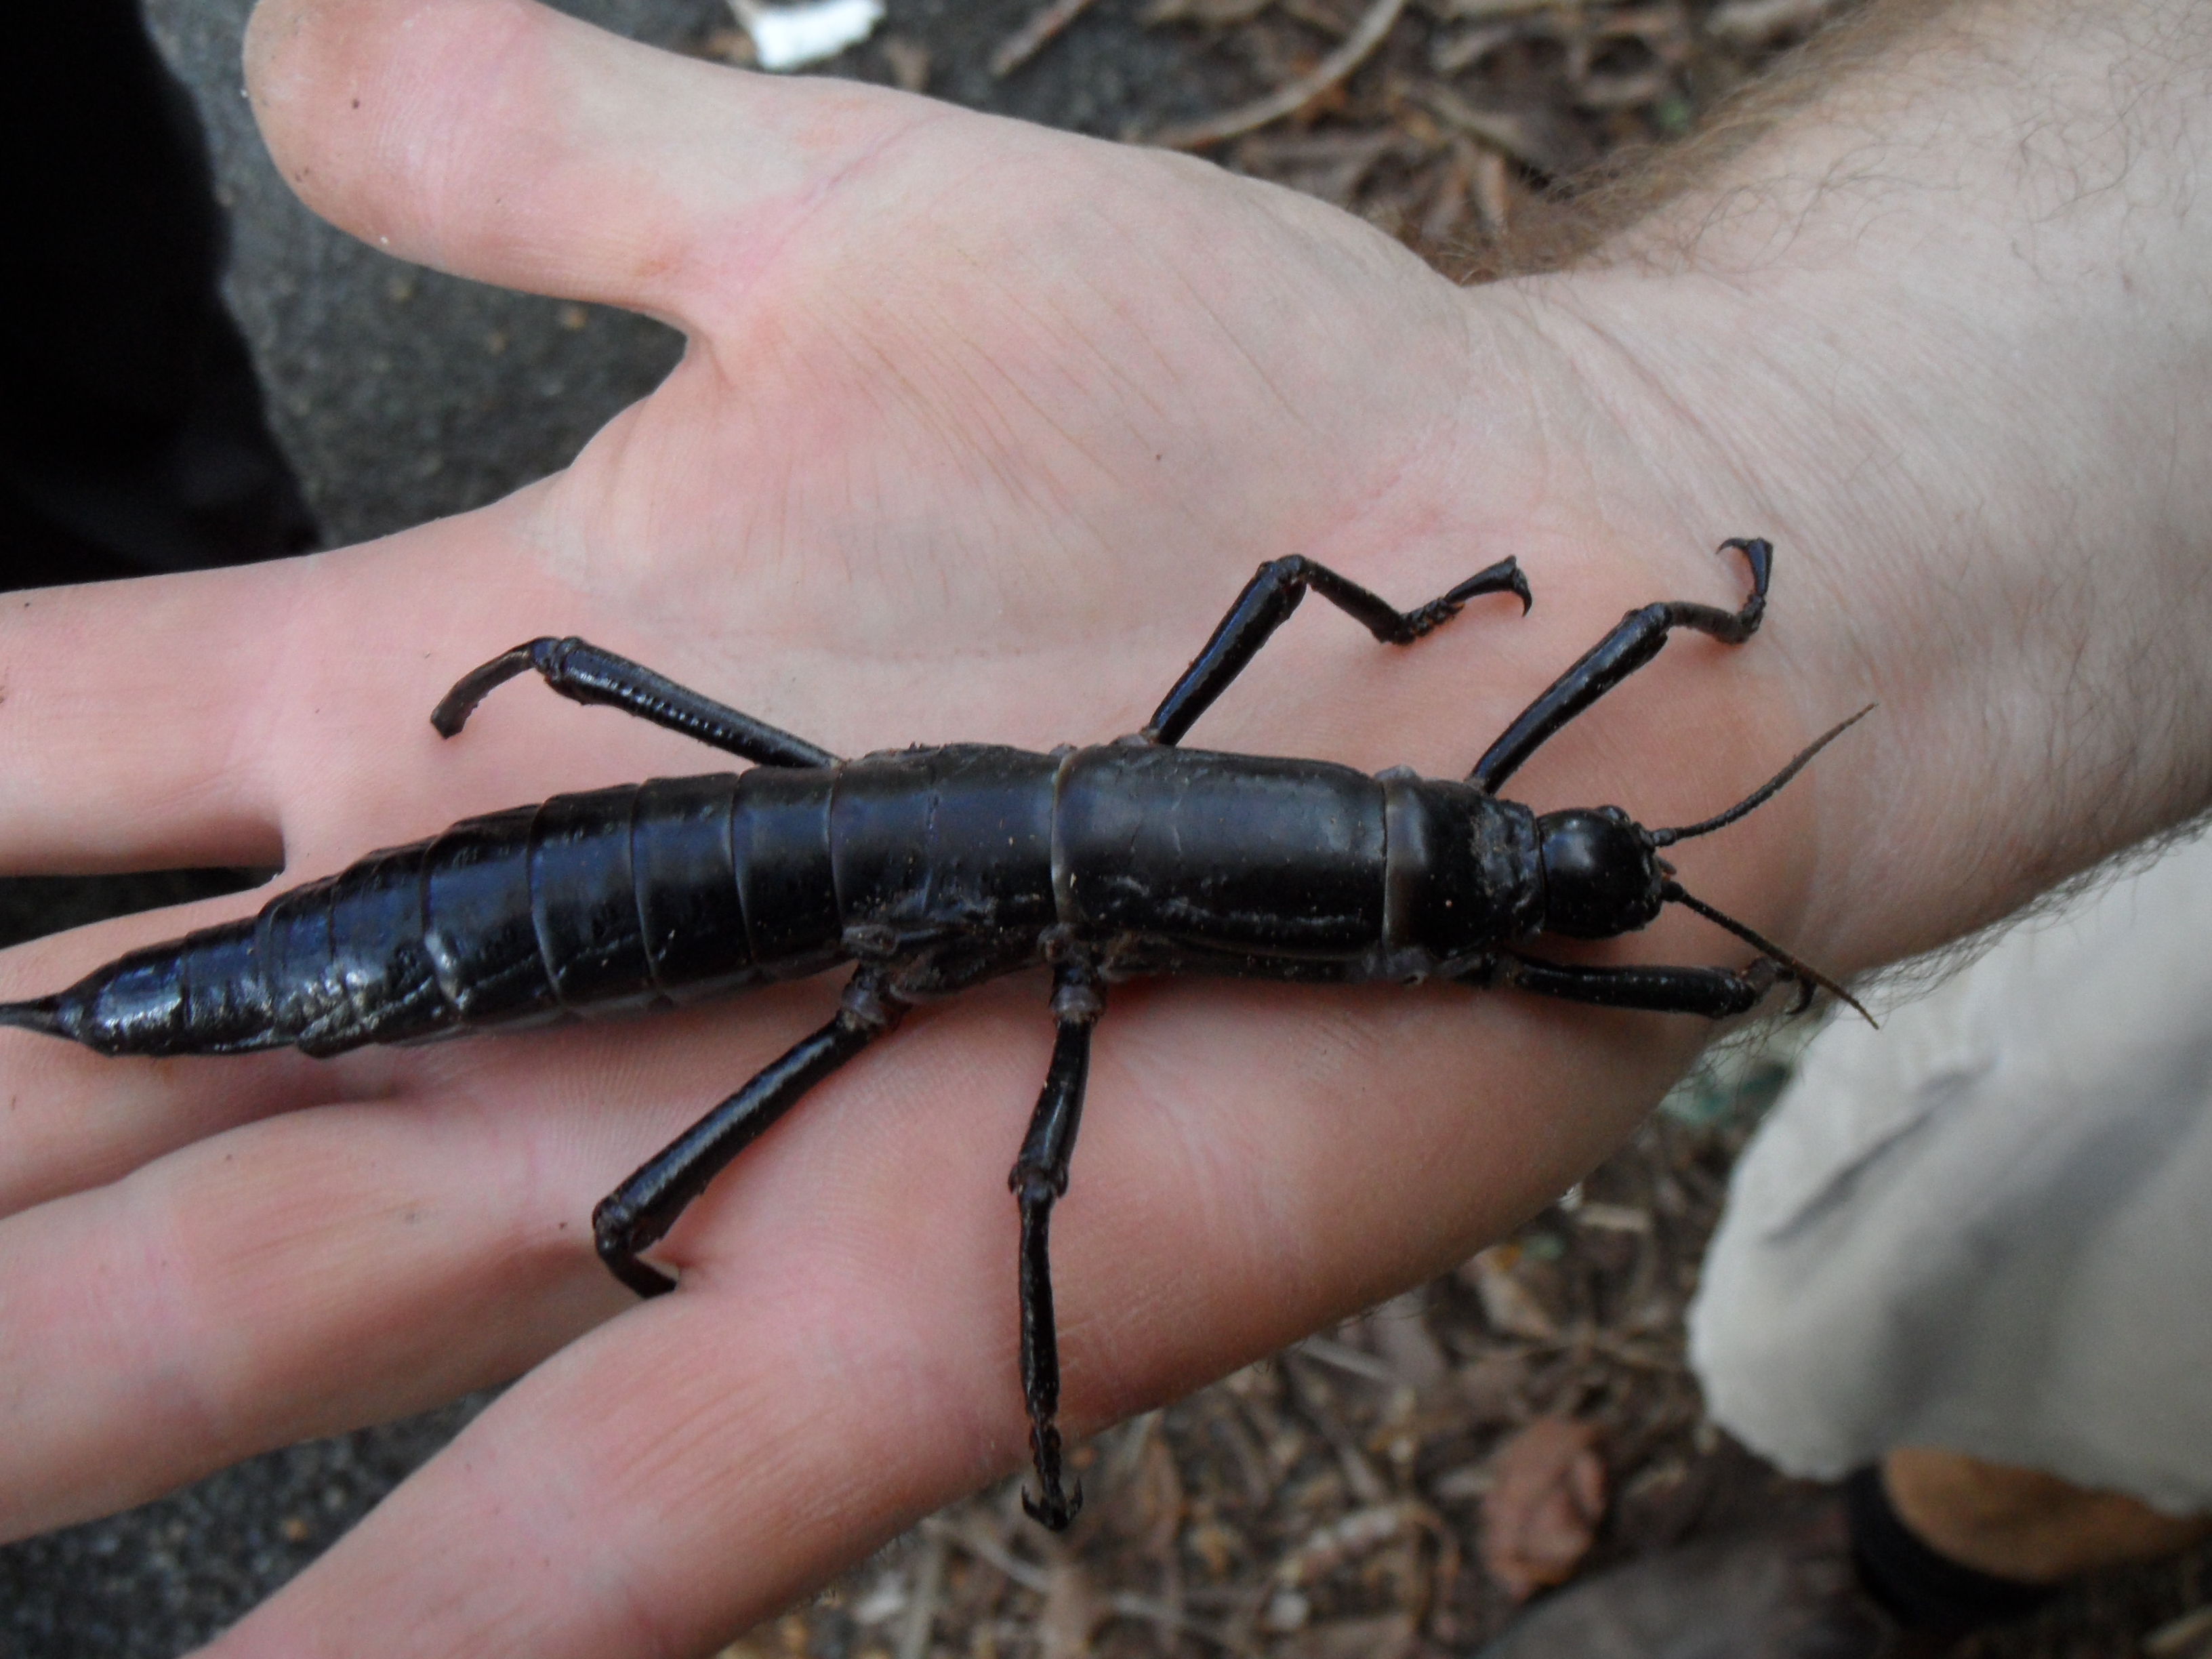 A big black insect on a hand